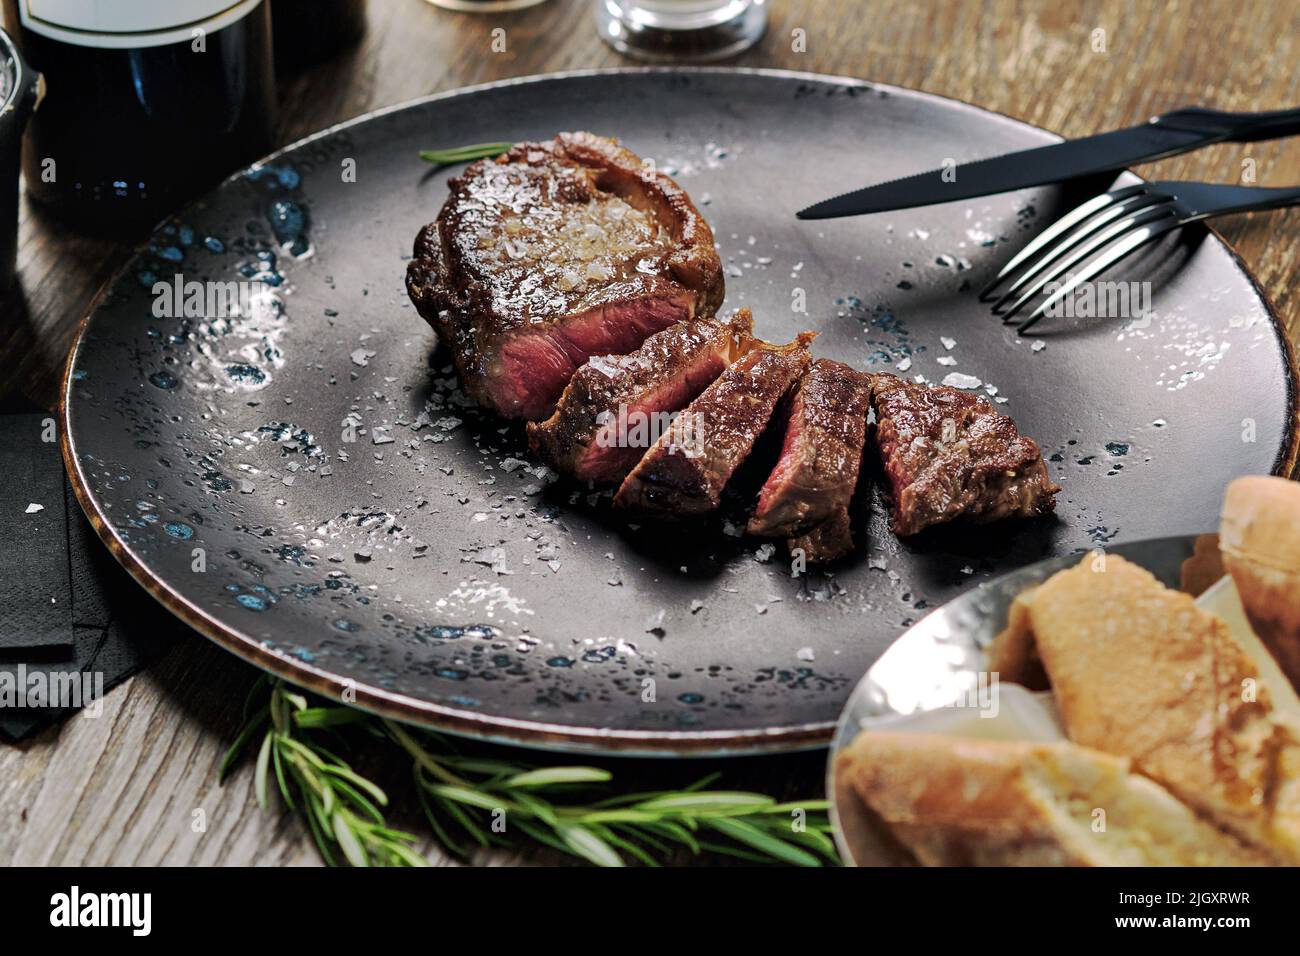 Close up shot sliced medium rare steak served on plate with cutlery and bowl with fresh baked bread. Main course, restaurant dish, eating concept Stock Photo